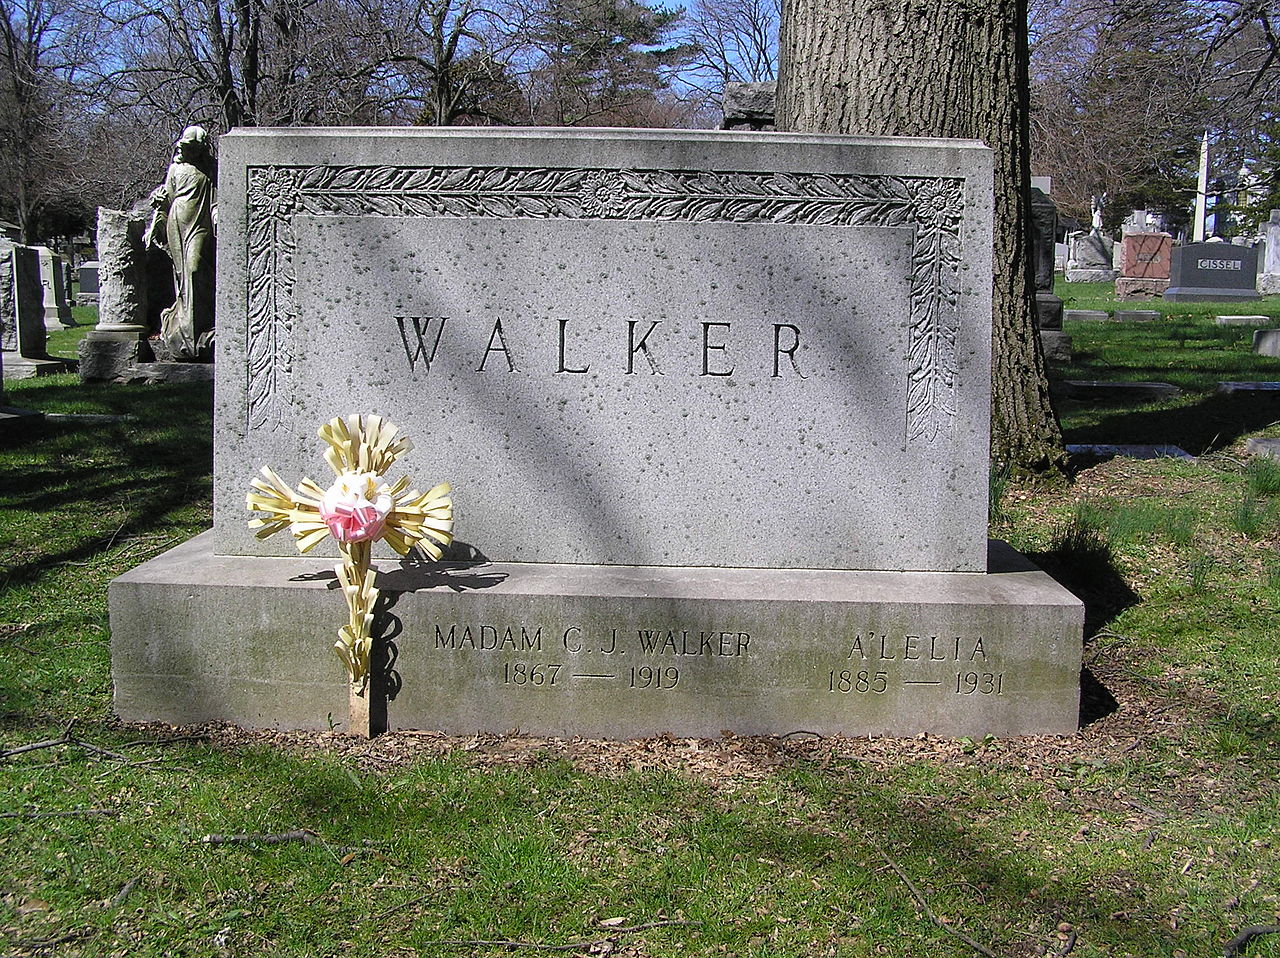 Walker's grave in New York's Woodlawn Cemetery